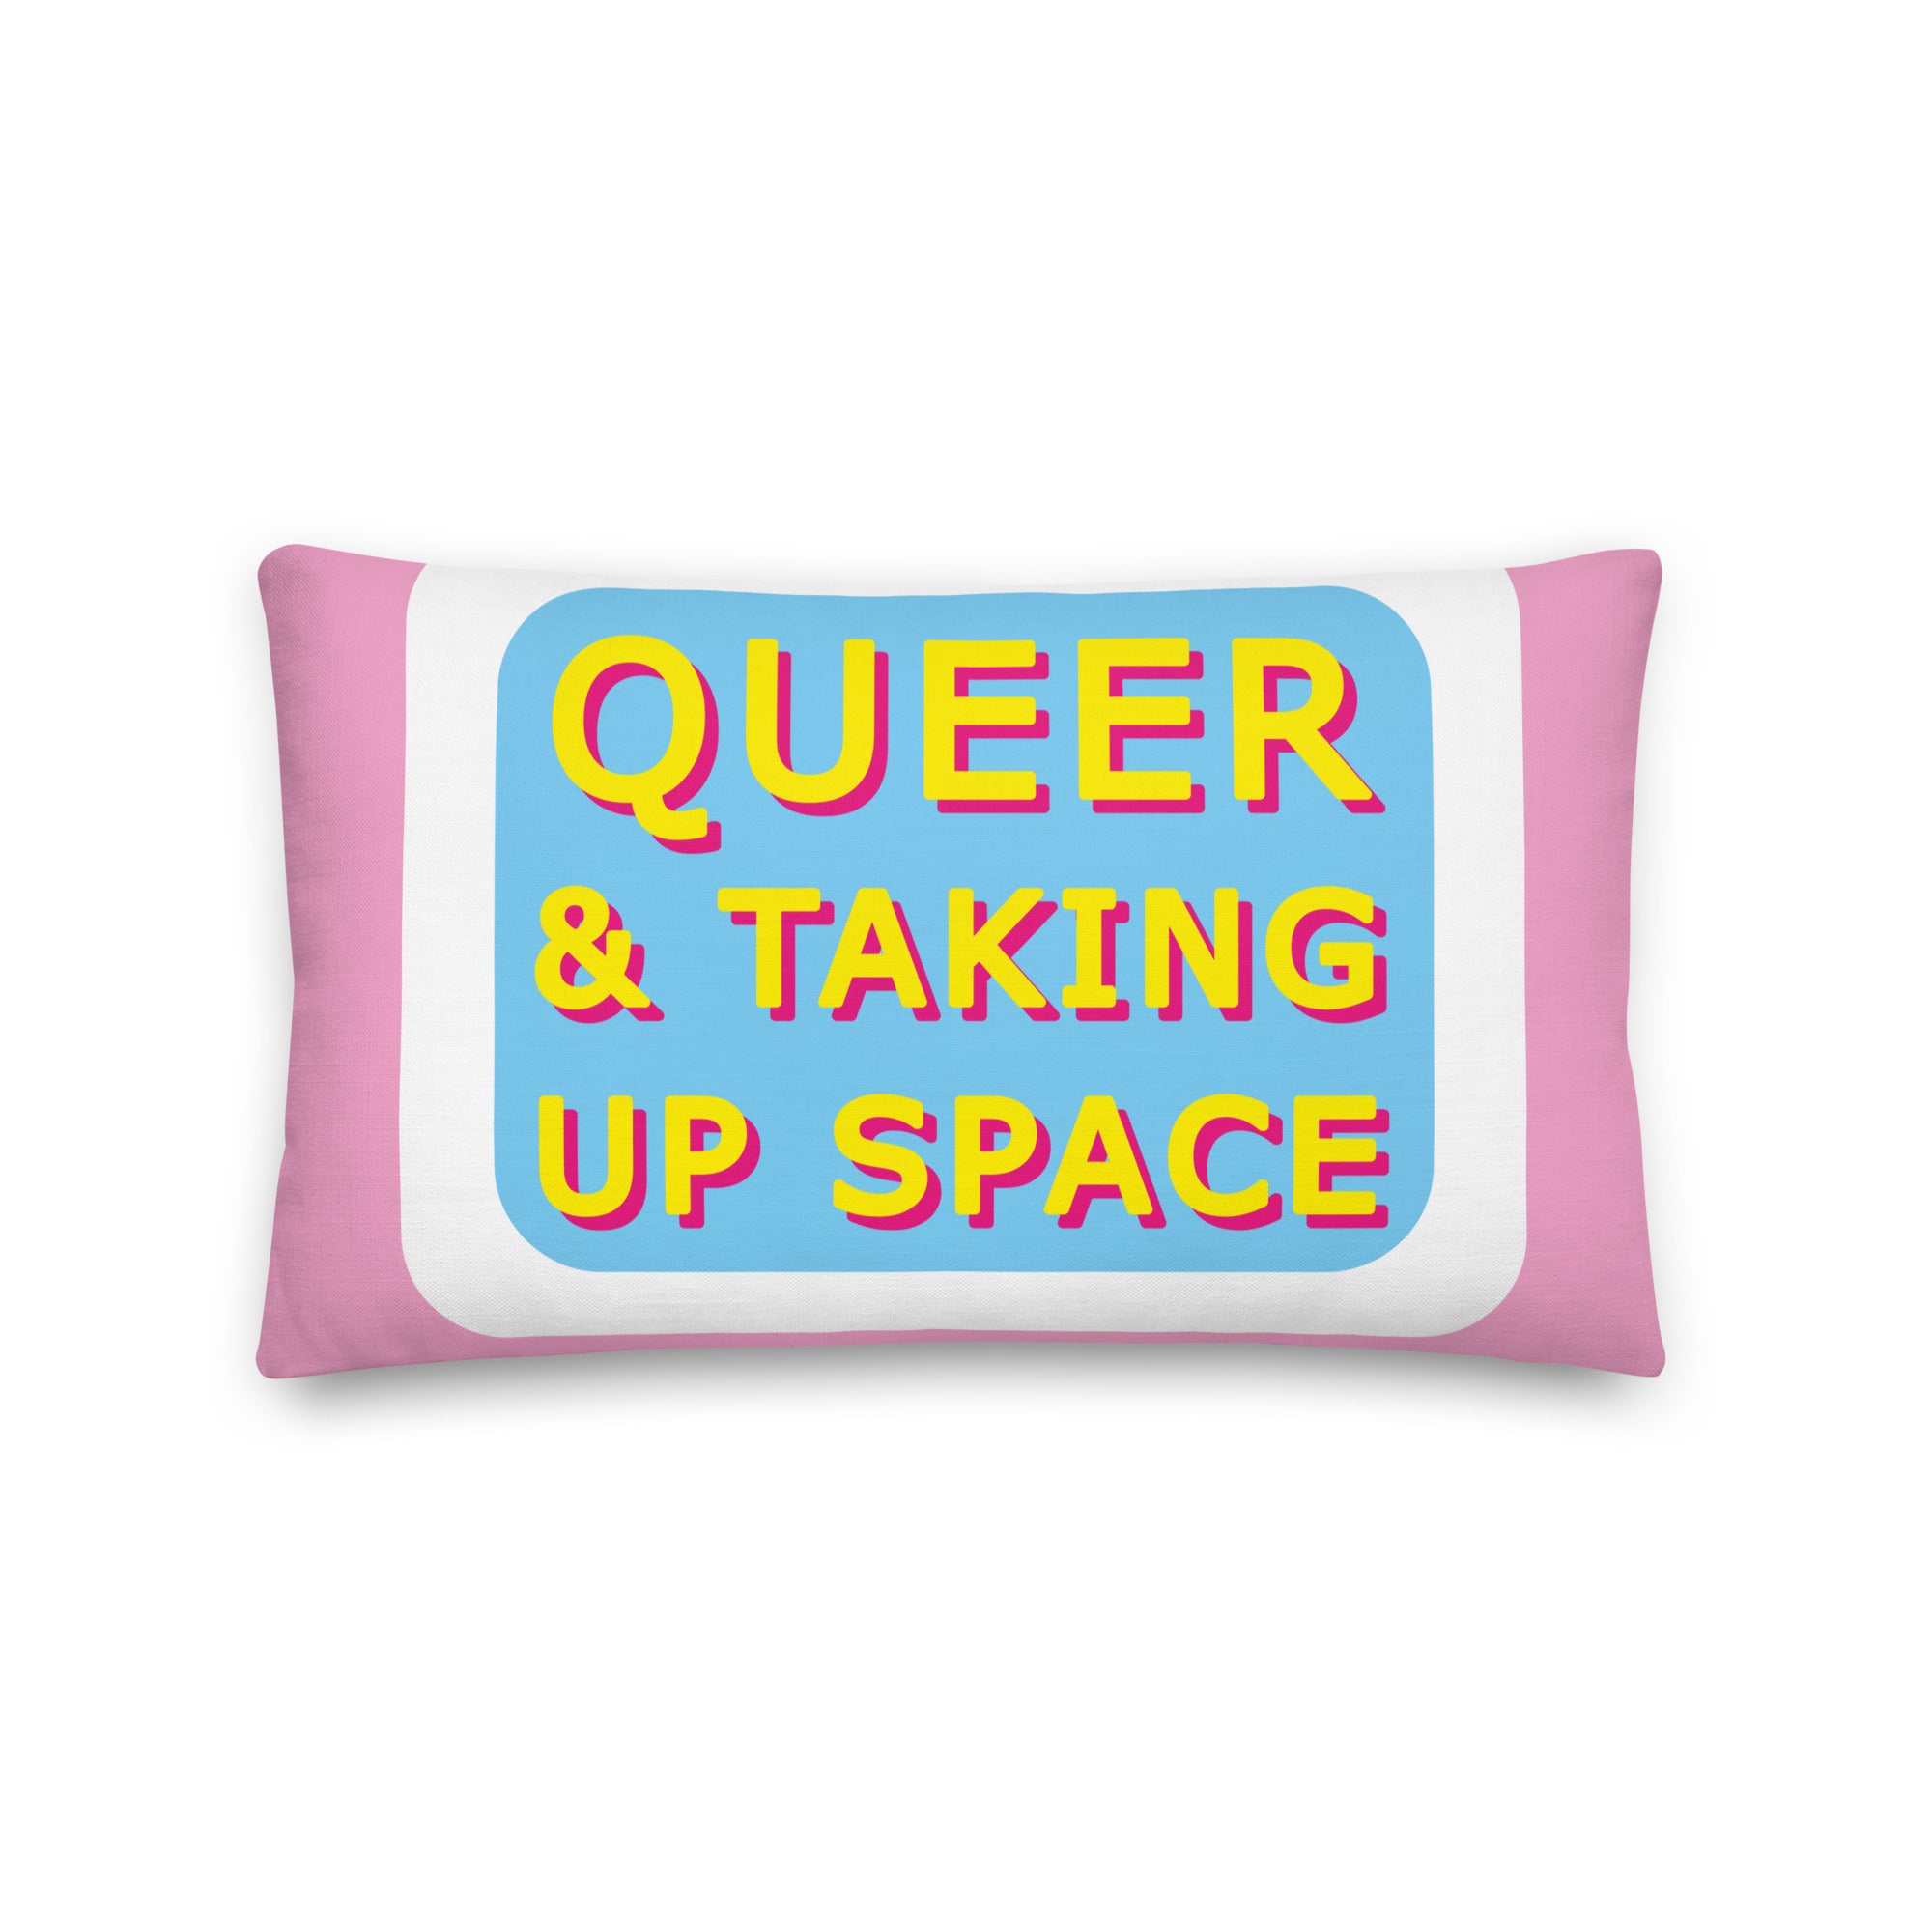 Queer & Taking Up Space Pink, Blue & White Cushions